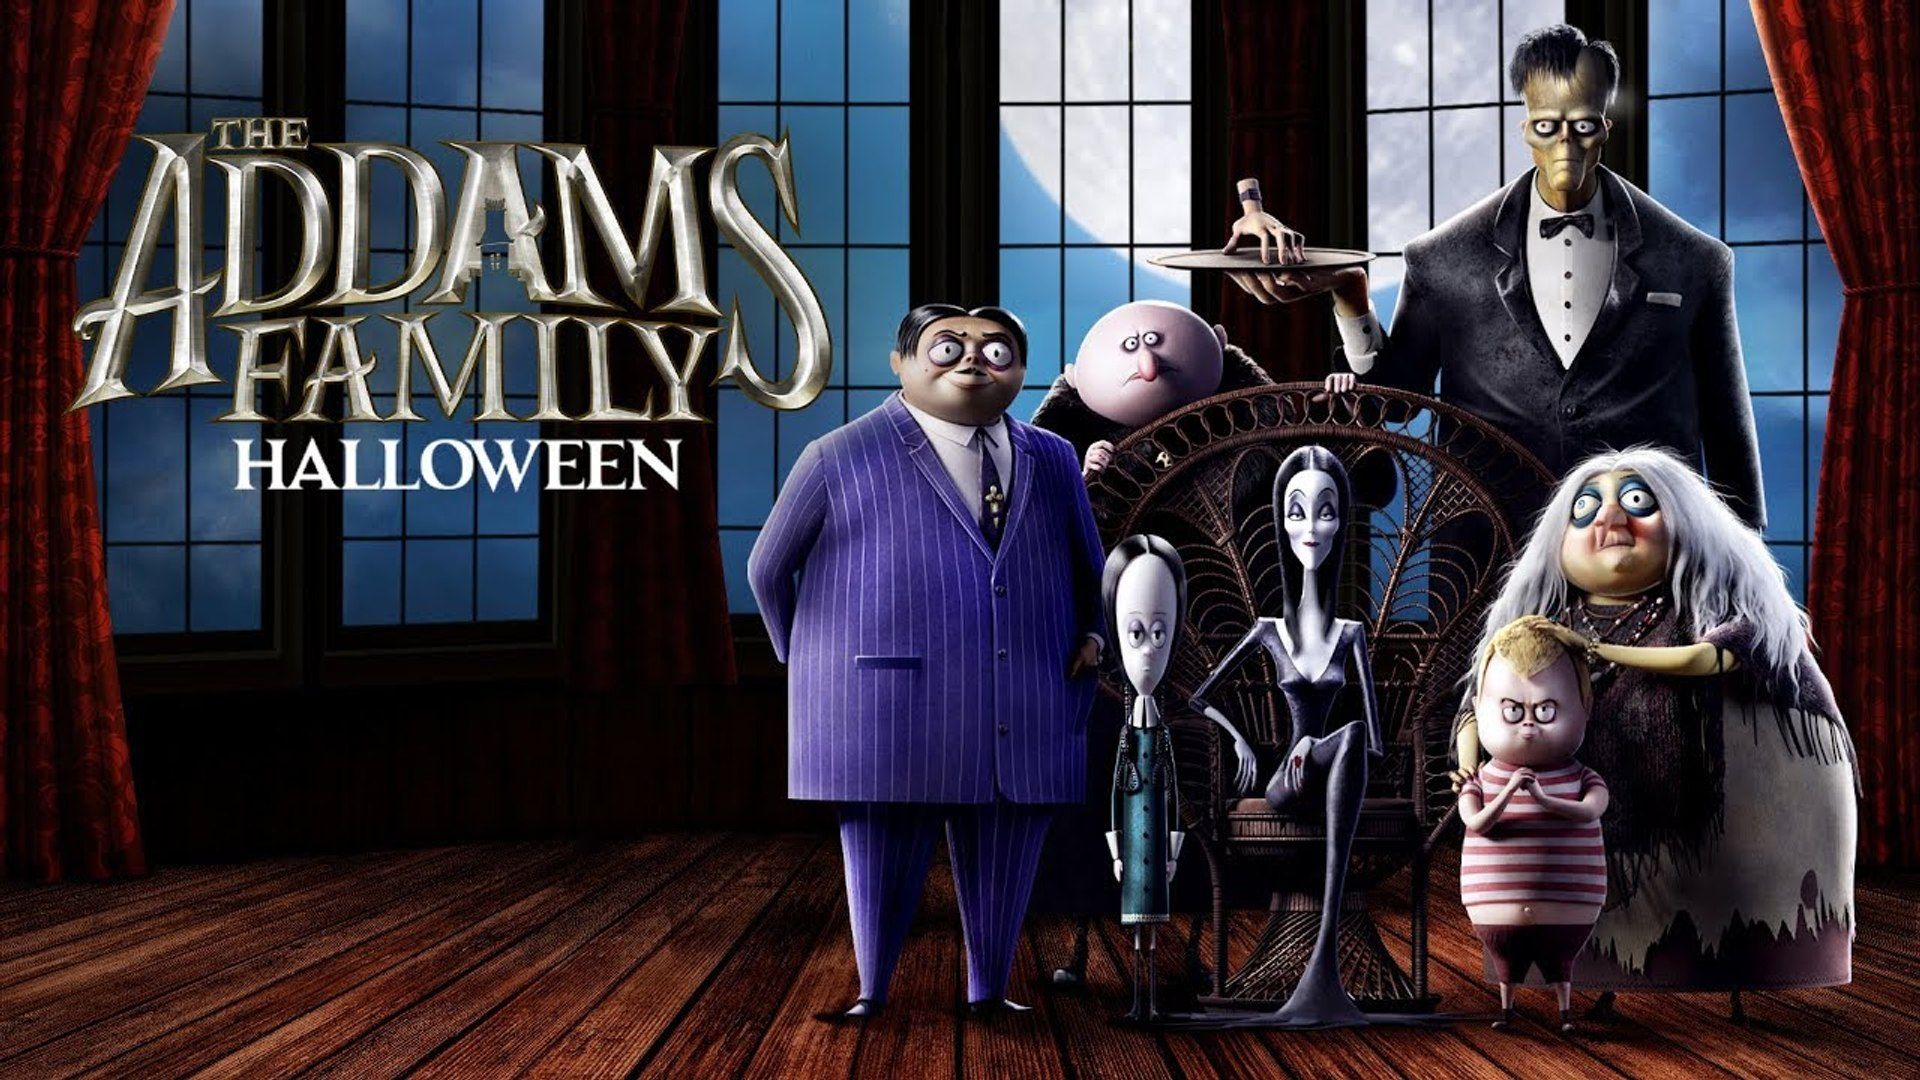 The Addams Family 2019 Sequel Announced + The Addams Family Wallpaper